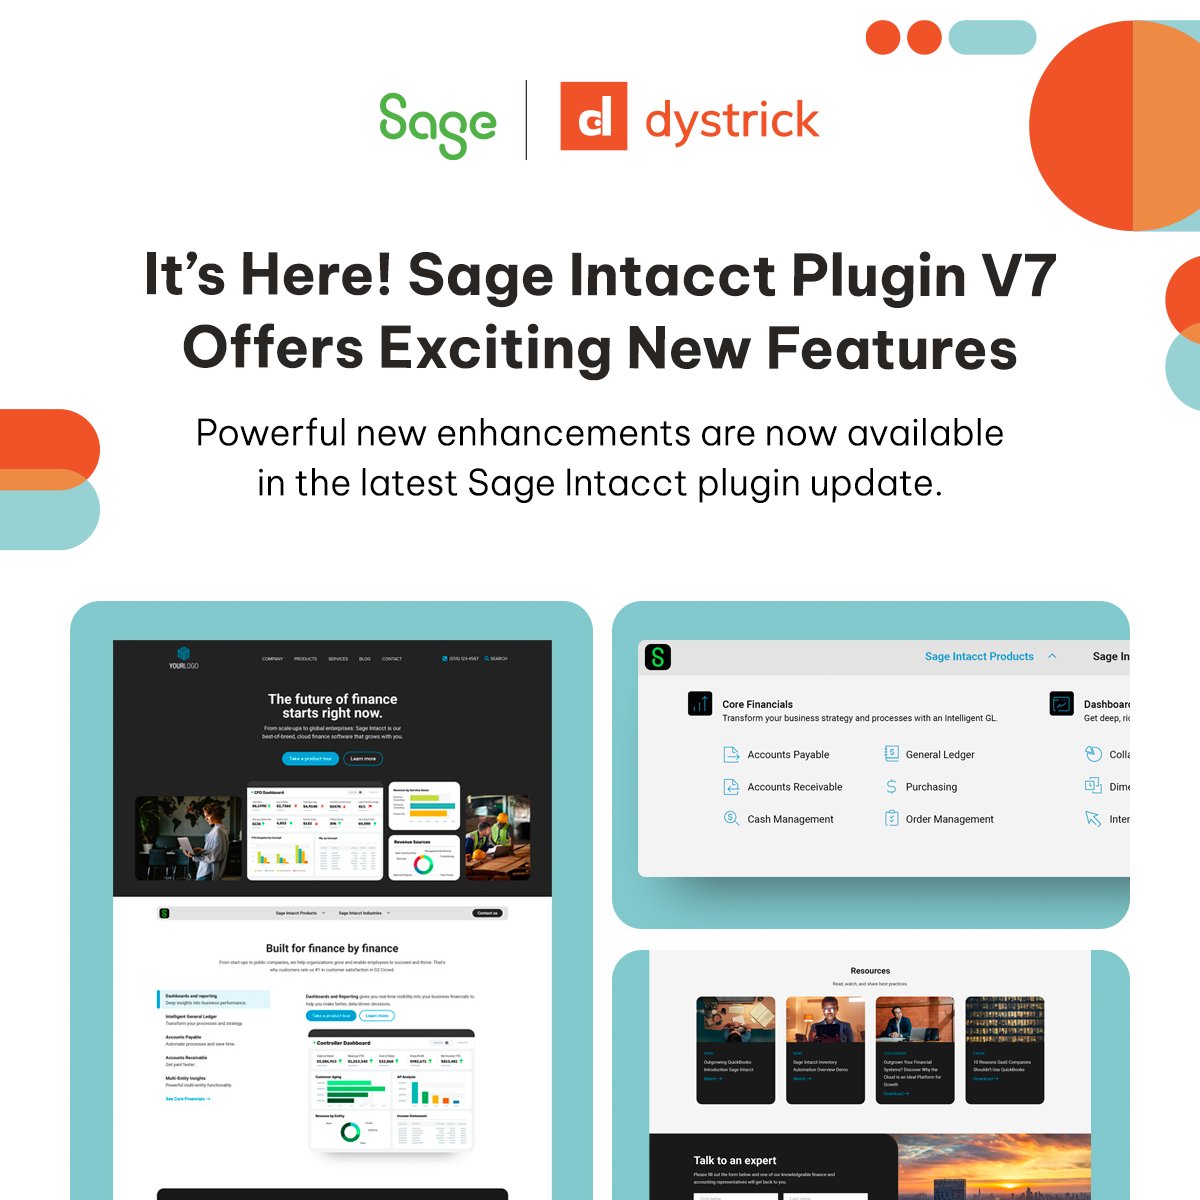 Web design doesn't have to be complicated.

Introducing the dystrick + Sage Intacct partner plugin version 7 featuring exciting new updates designed for optimal usability and efficiency.

dystrickdesign.com/sagepartners

#dystrickdesign #webdesign #marketing #sagepartner #creatives